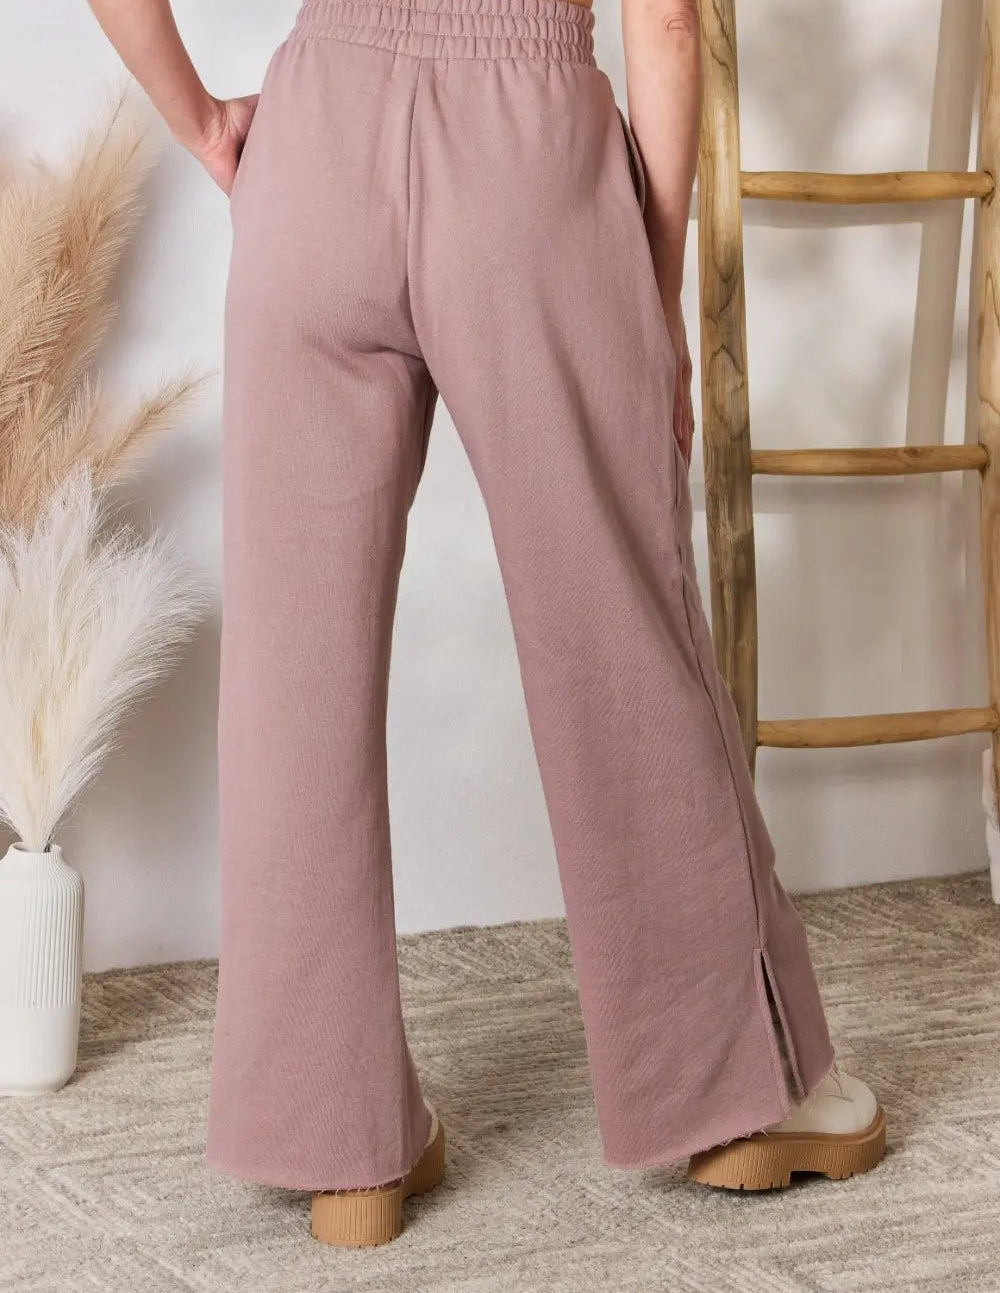 CASUAL RELAXED FIT COMFORTABLE PANTS FOR LOUNGING - MeadeuxCASUAL RELAXED FIT COMFORTABLE PANTS FOR LOUNGINGBottomsMeadeux